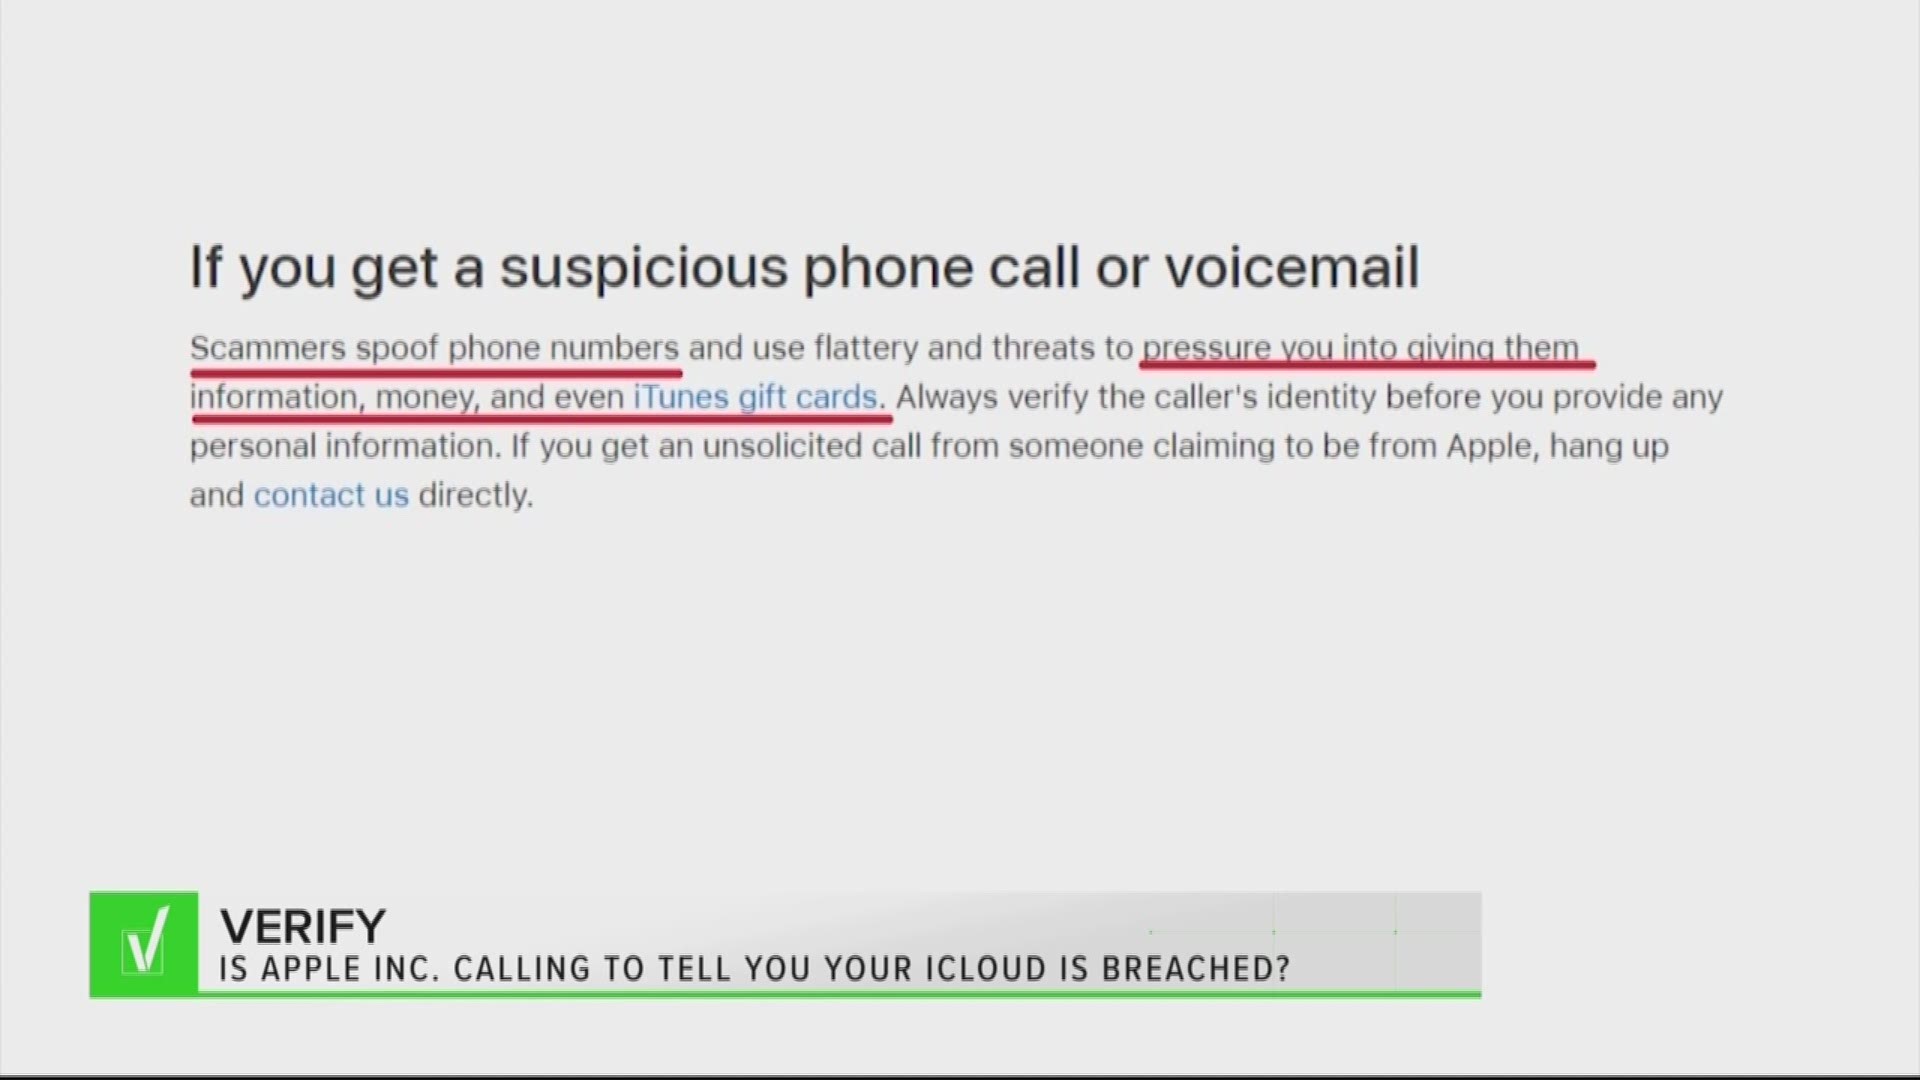 Apple doesn't just call you. If you get a call, hang up!